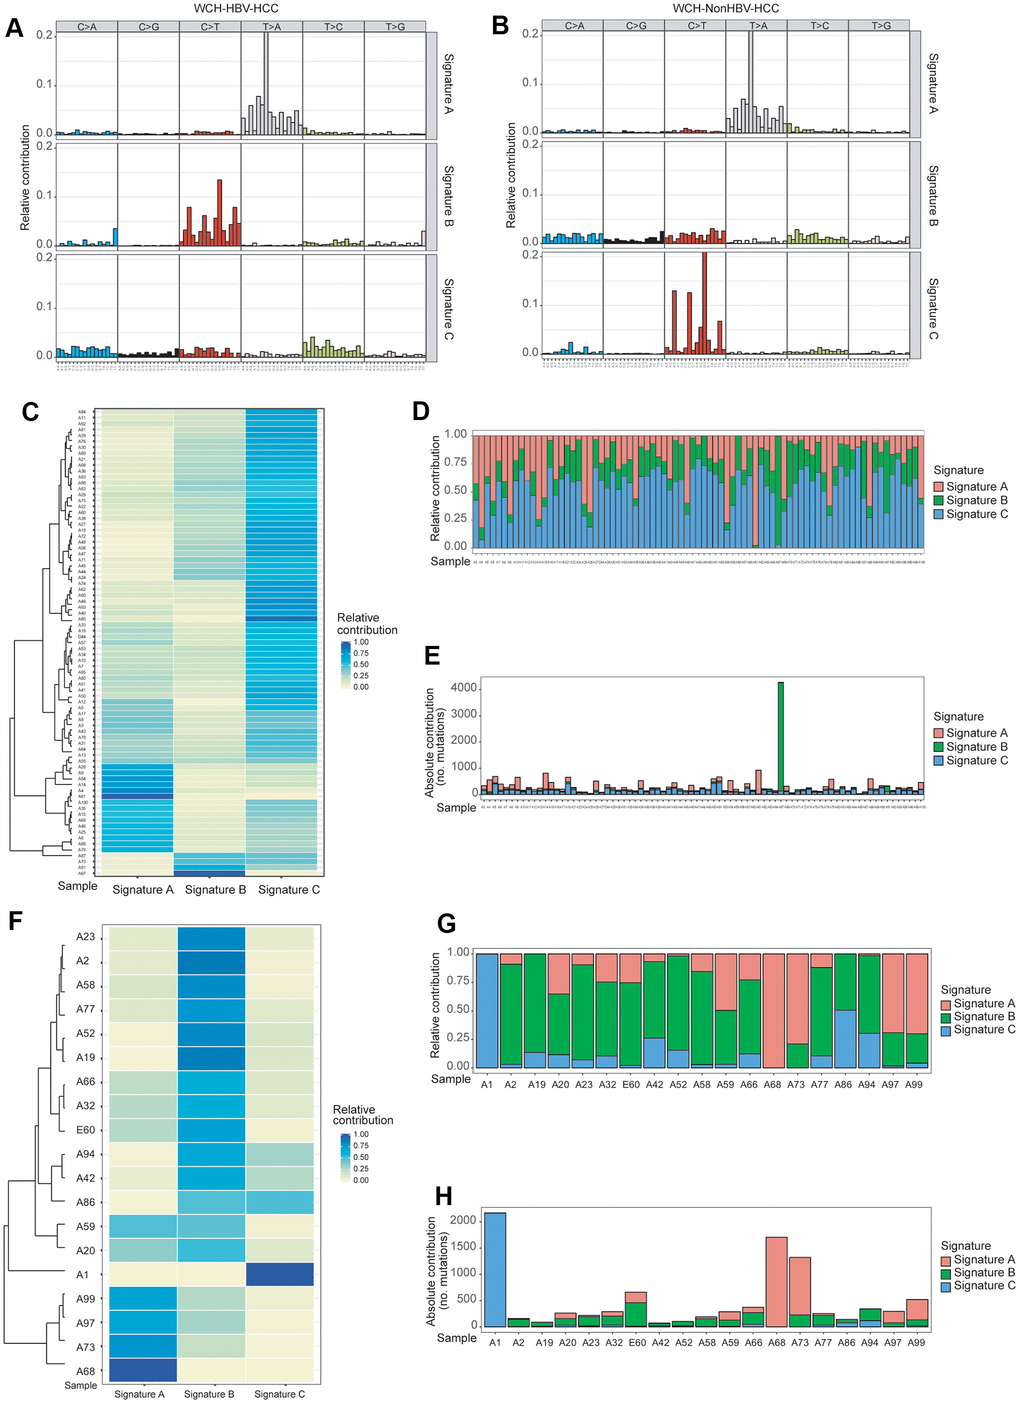 Identification of mutation Signatures in the WCH group. (A) Patterns of 3 signatures (Signatures A–C) identified in the WCH-HBV-HCC group. (B) Patterns of 3 signatures (Signatures A–C) identified in the WCH-NonHBV-HCC group. (C) The distribution of mutation Signatures that were identified in the WCH-HBV-HCC group. (D) The relative contribution of the 3 Signatures in samples from the WCH-HBV-HCC group. (E) The contributions of mutational signatures to tumors in the WCH-HBV-HCC group. The sample names are displayed on the horizontal axis, whereas the vertical axis depicts the number of mutations of samples in the WCH-HBV-HCC group. (F) The distribution of mutation Signatures that were identified in the WCH-NonHBV-HCC group. (G) The relative contribution of the 3 Signatures in samples from the WCH-NonHBV-HCC group. (H) The contributions of mutational signatures to tumors in the WCH-NonHBV-HCC group.